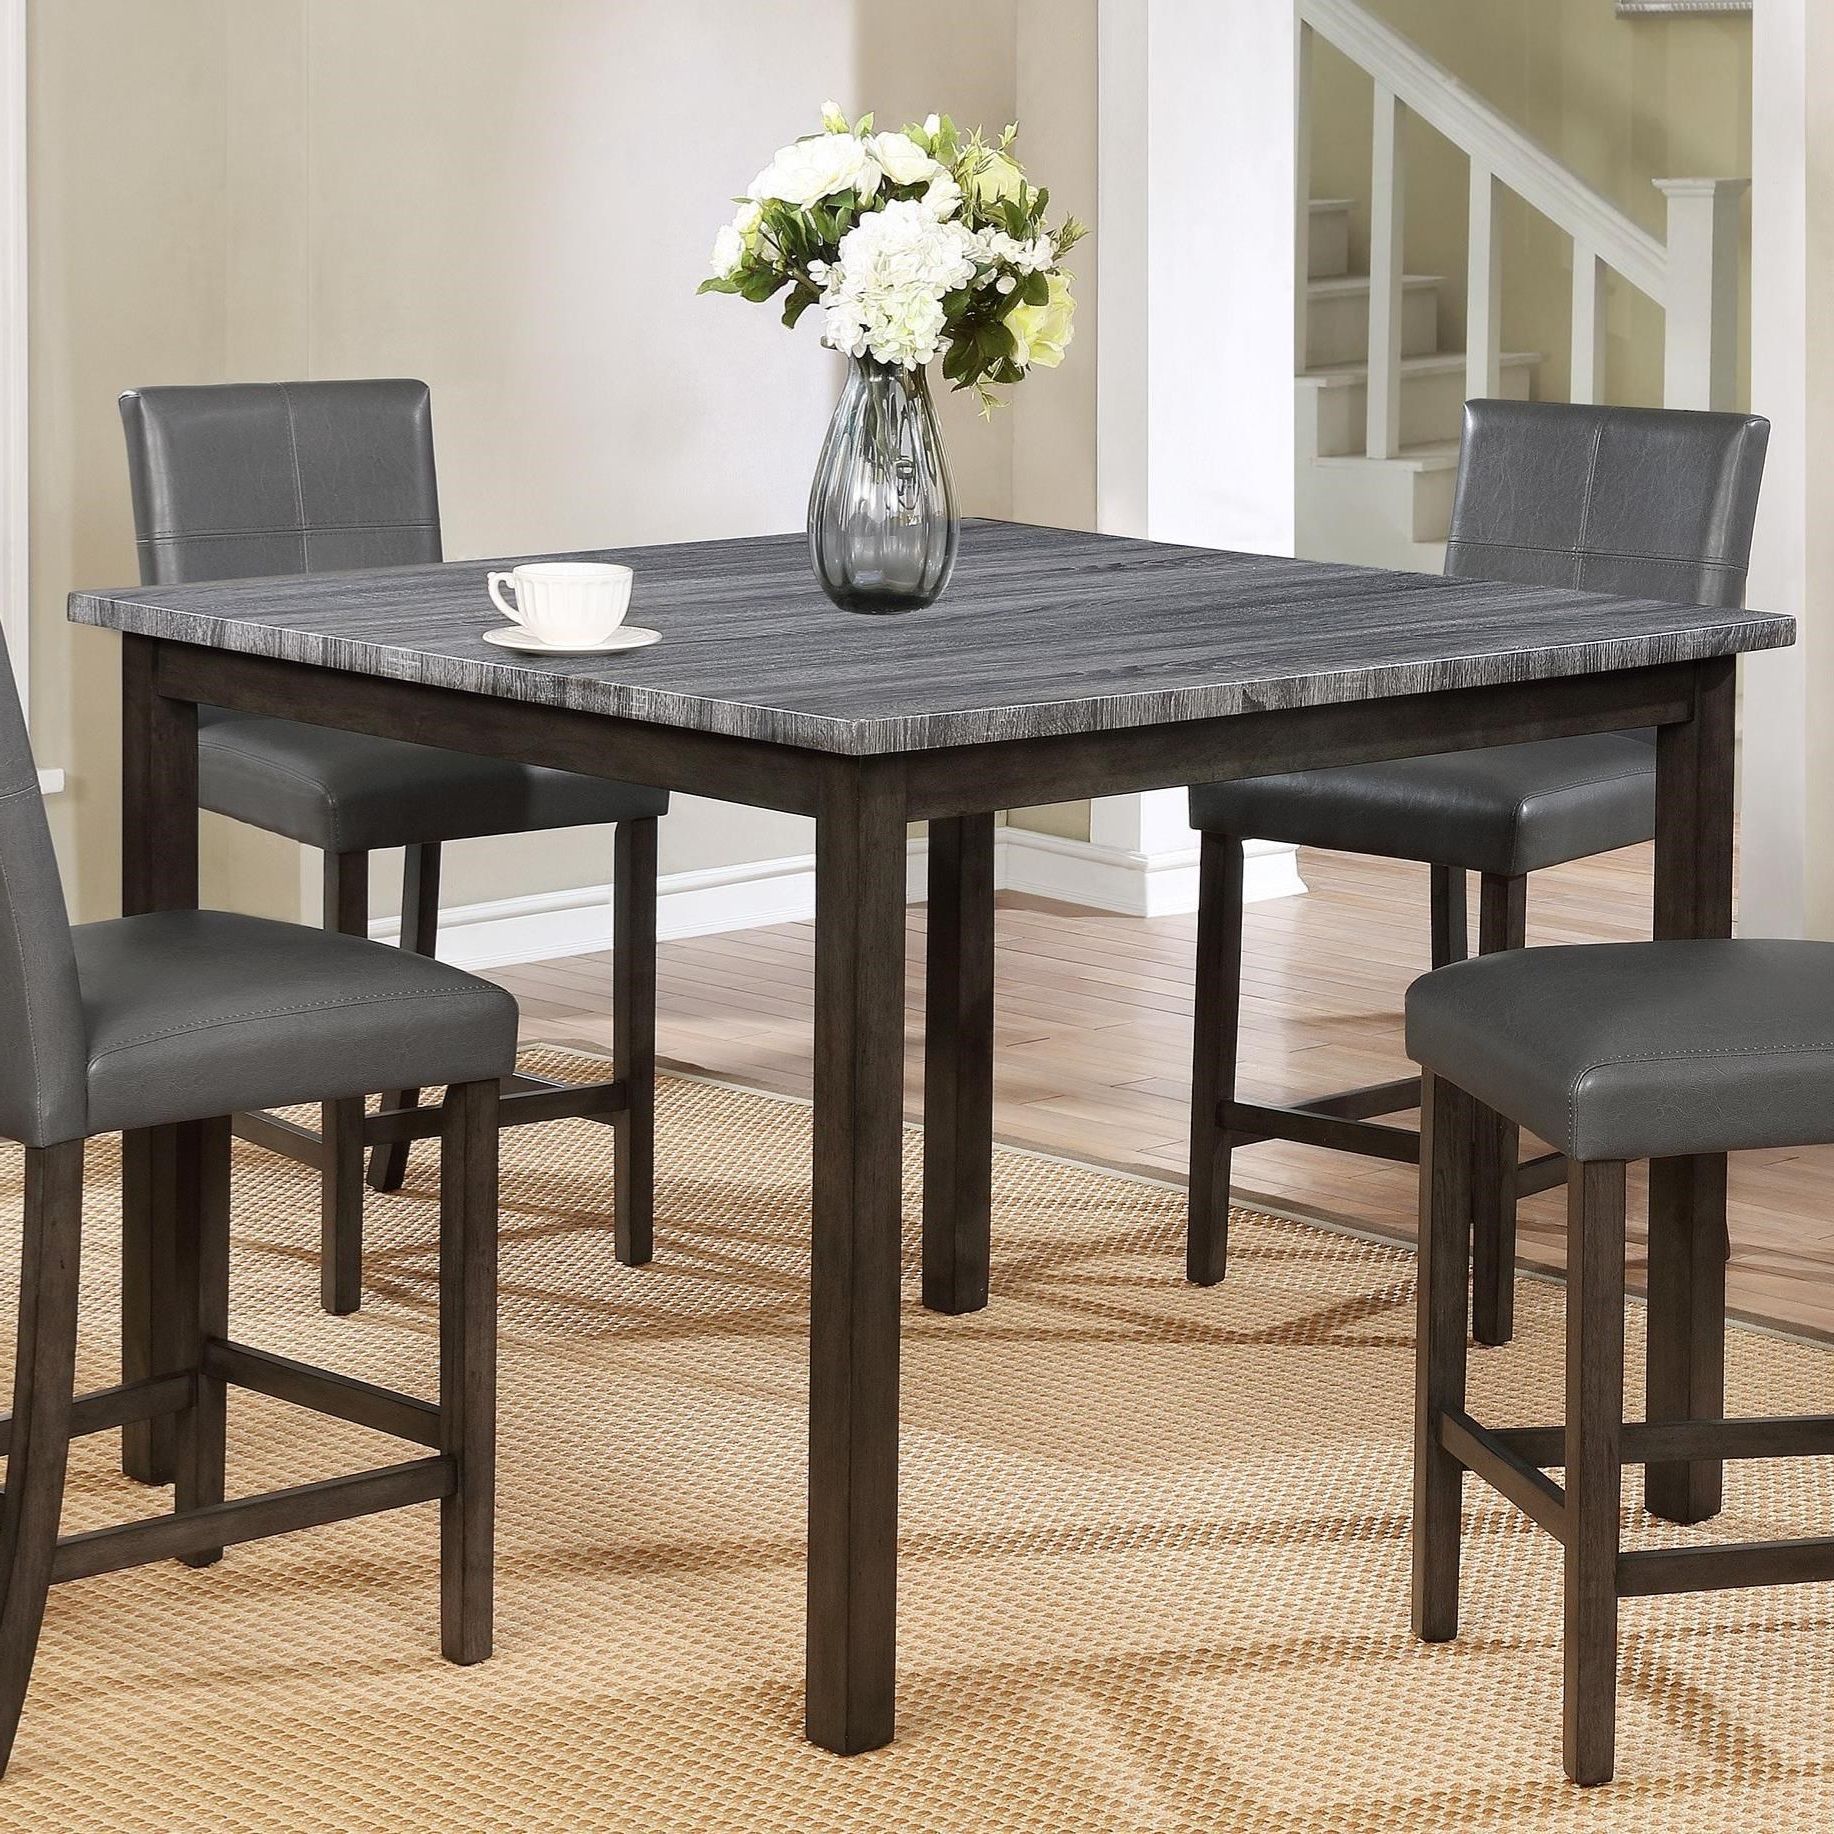 Most Recently Released Crown Mark Pompei Two Tone Counter Height Dining Table Regarding Mciver Counter Height Dining Tables (View 16 of 20)